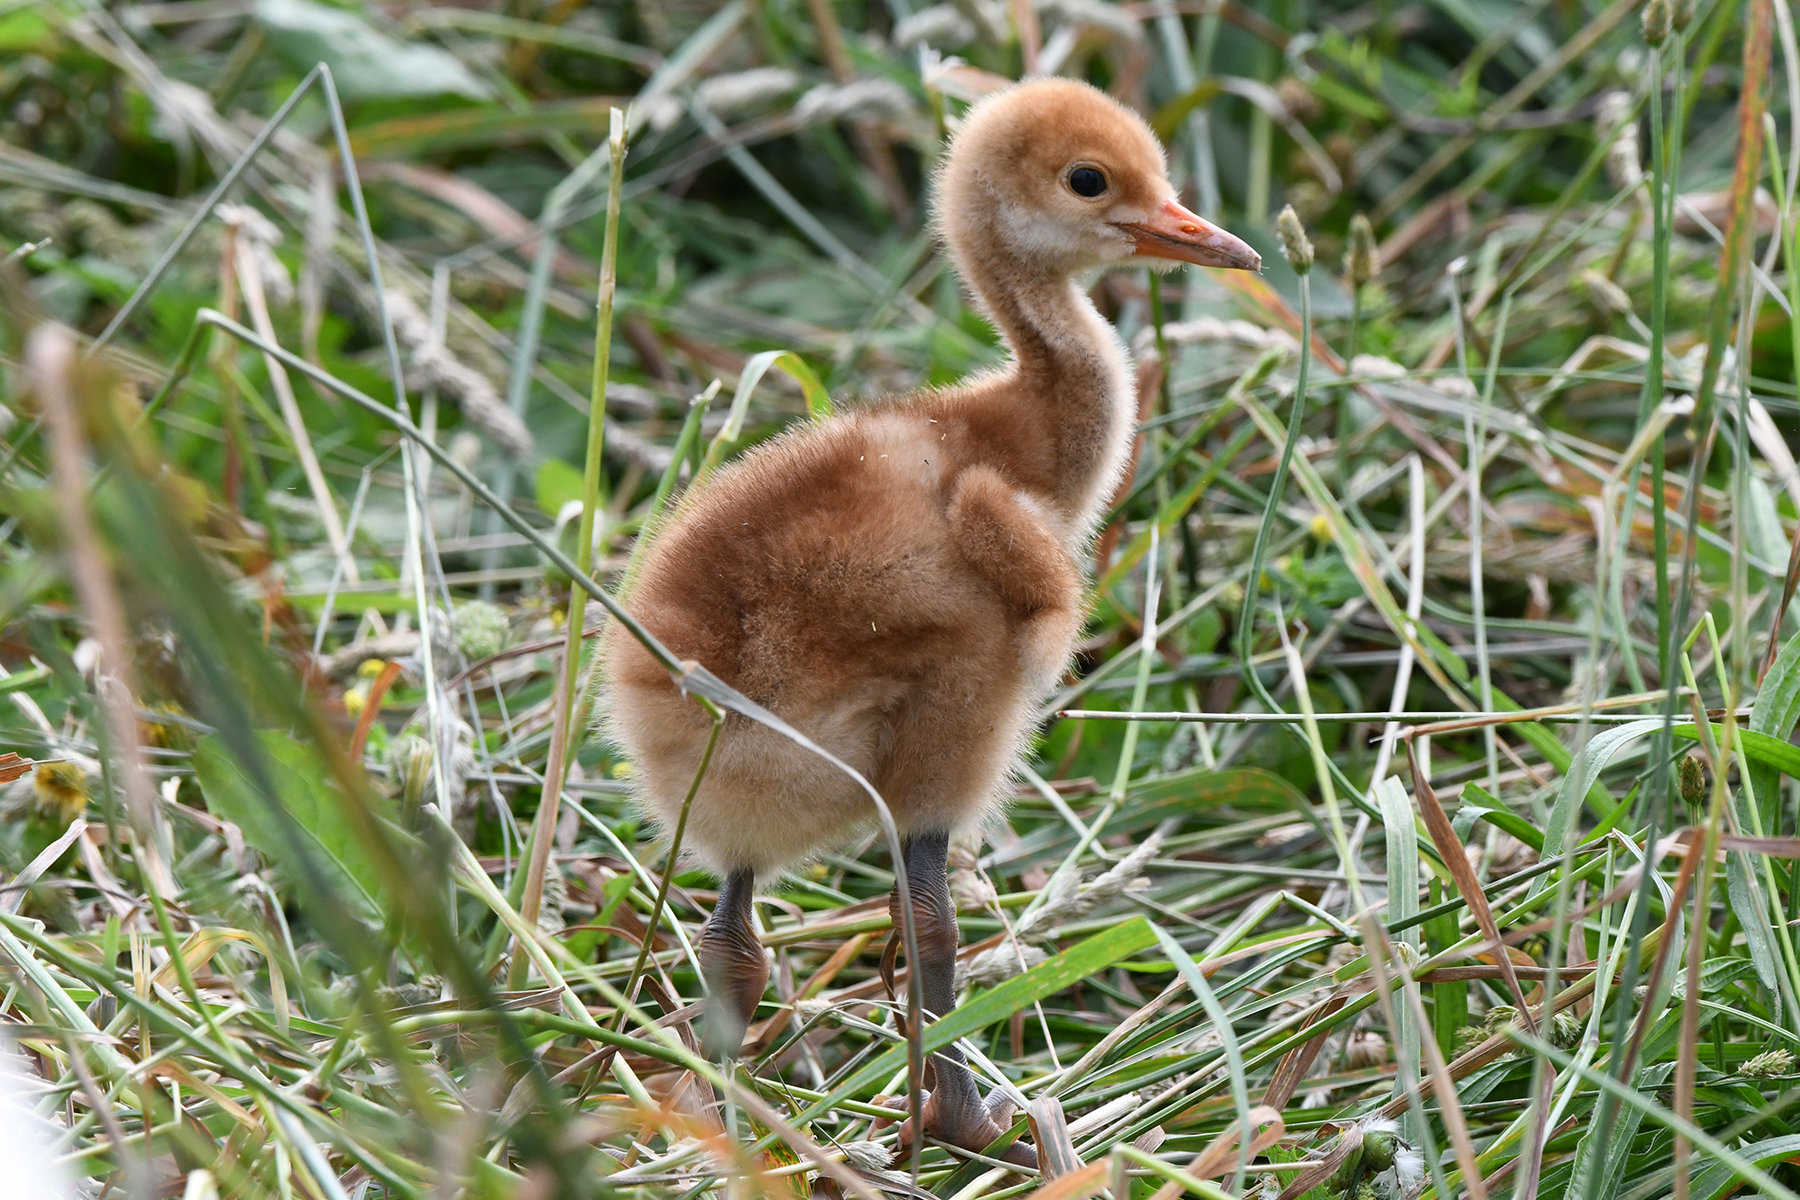 A red-crowned crane chick nestled among the grasses.